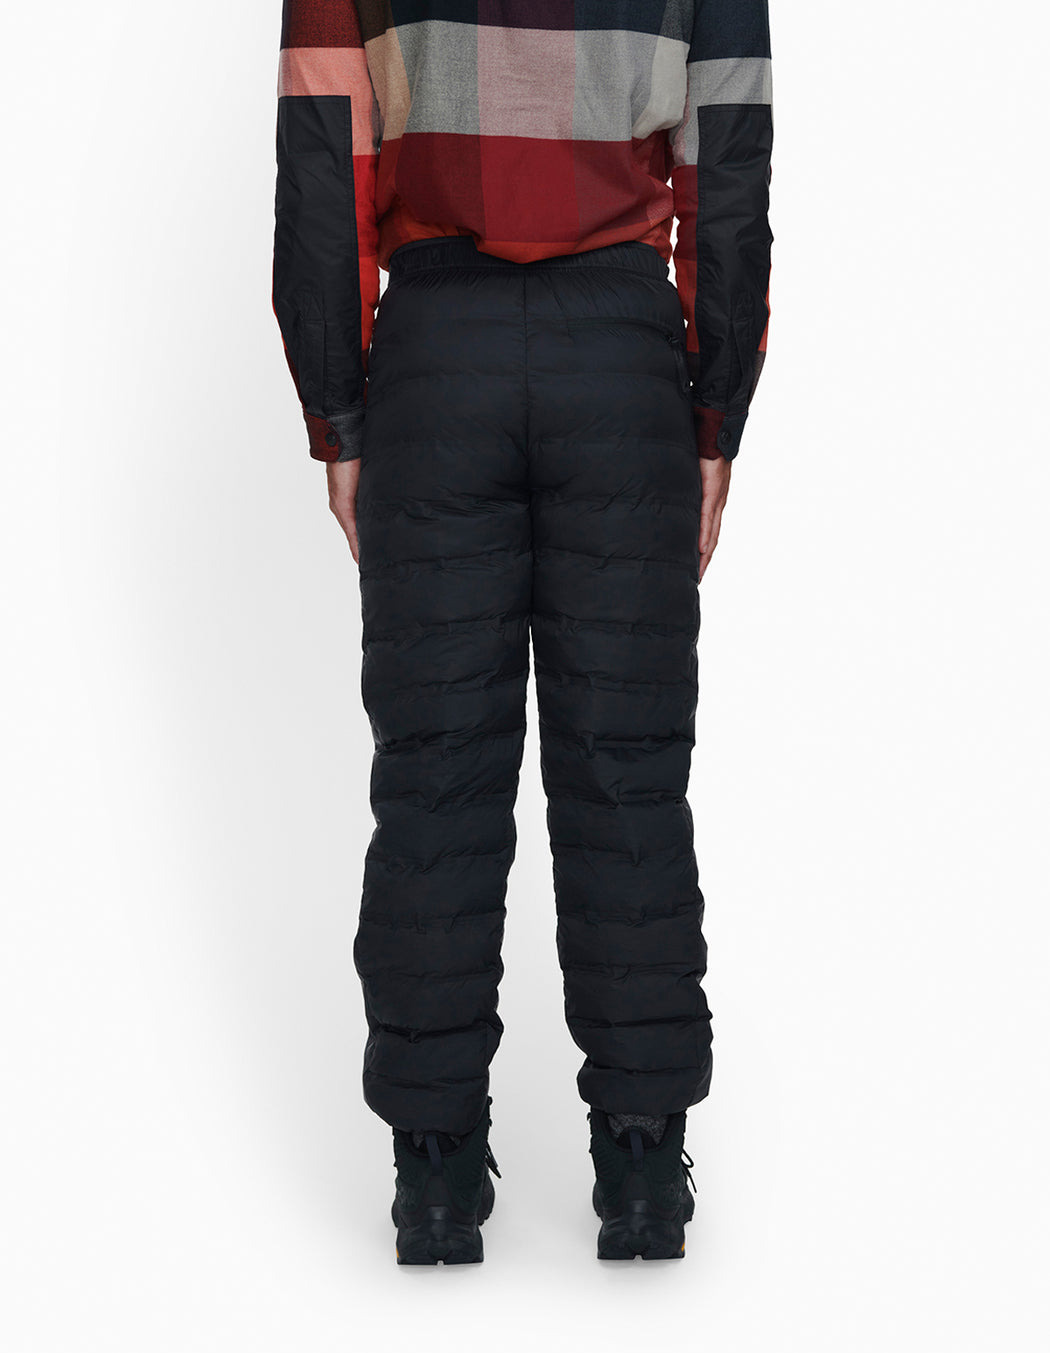 Ozone Insulated Pant